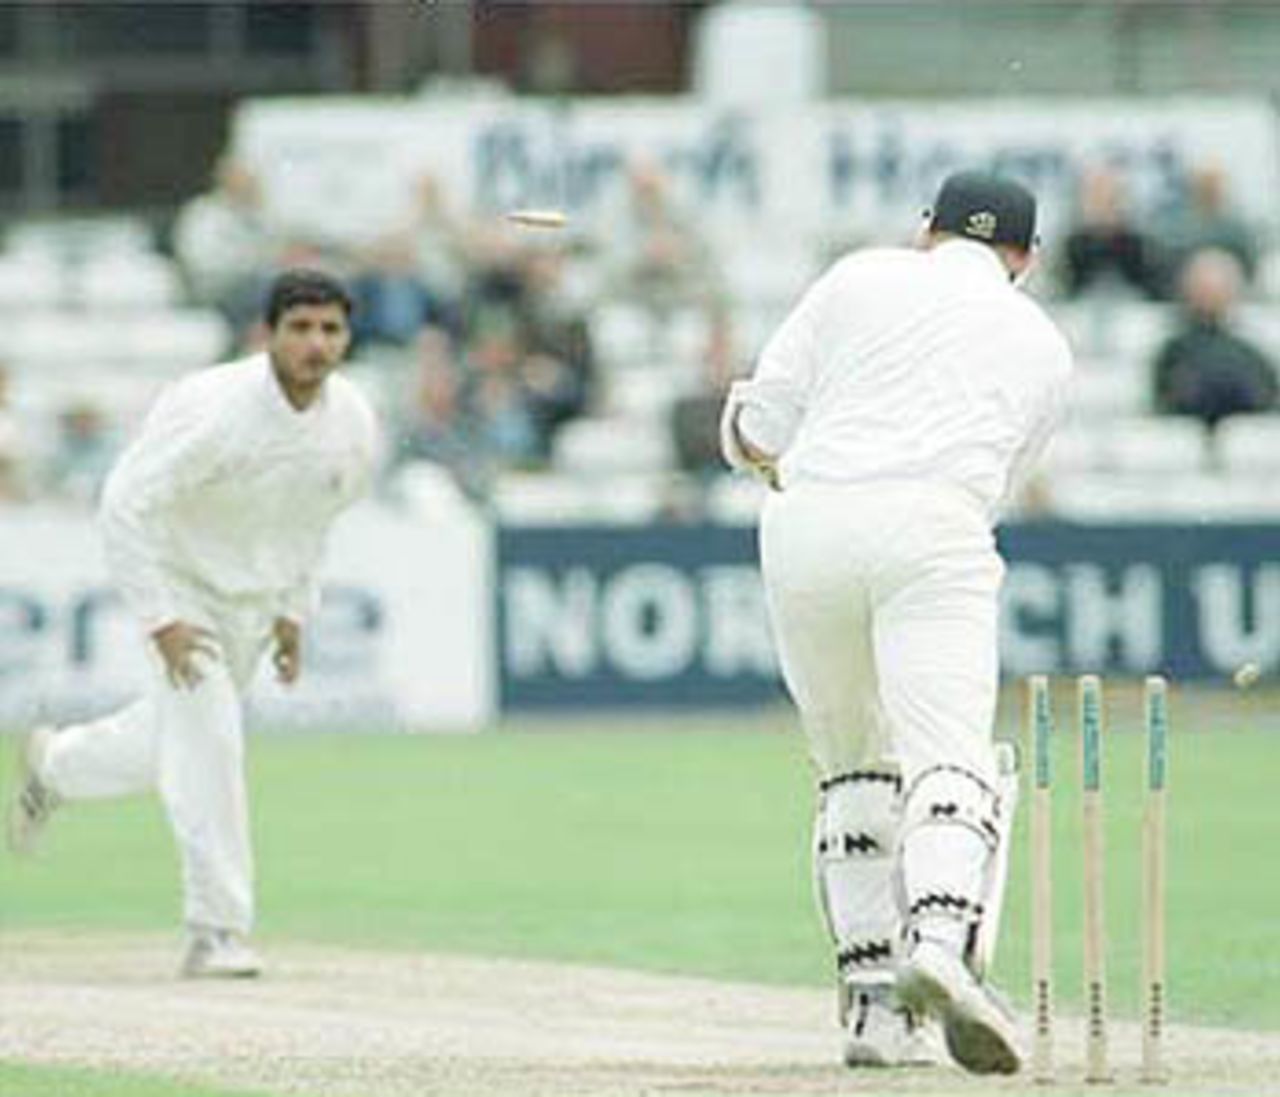 Sourav Ganguly clean bowls Steve Titchard, PPP healthcare County Championship Division One, 2000, Derbyshire v Lancashire, County Ground, Derby, 07-10 July 2000 (Day 1).